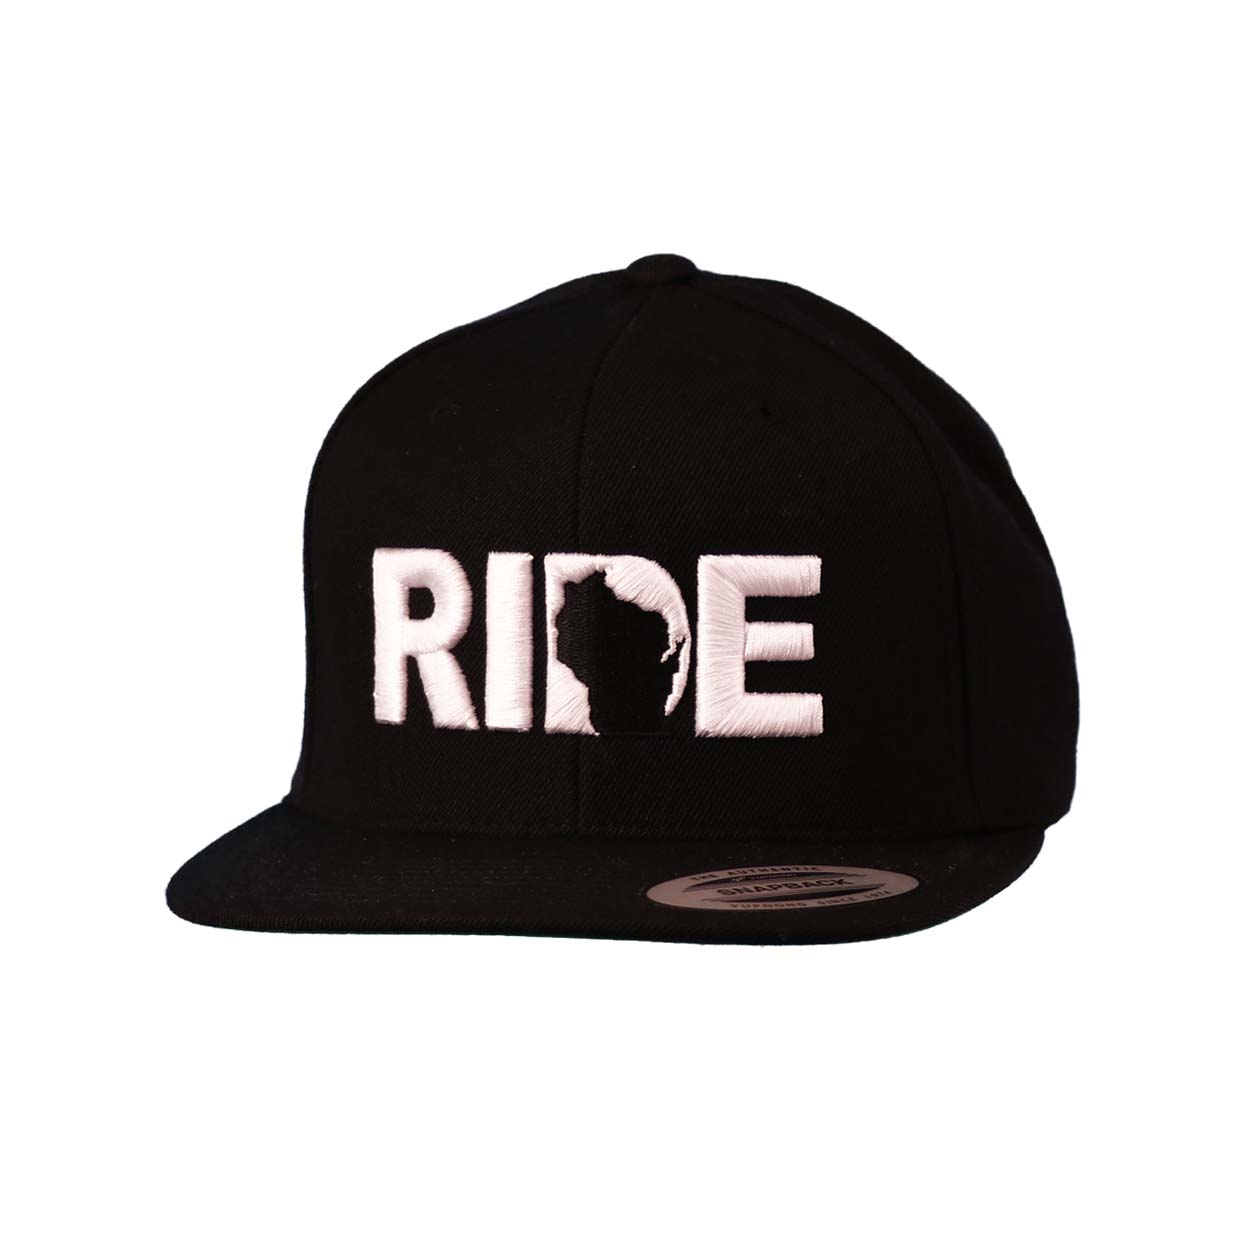 Ride Wisconsin Classic Pro 3D Puff Embroidered Snapback Flat Brim Hat Black